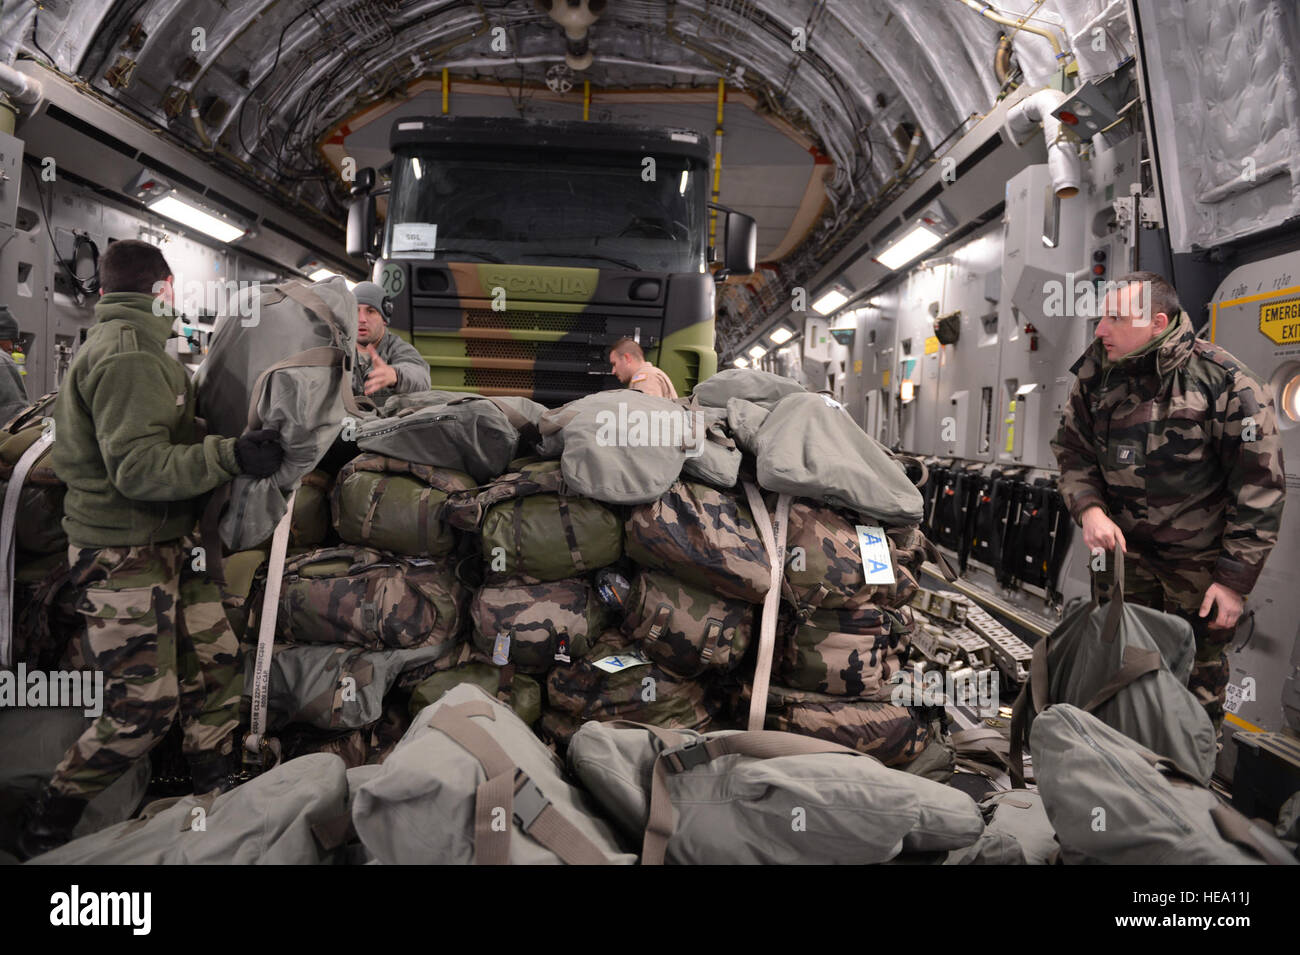 ISTRES, France – U.S. Airmen and French soldiers load equipment inside a  U.S. Air Force C-17 Globemaster III in Istres, France, Jan. 21, 2013. The  U.S. sent Airmen to France as logistical